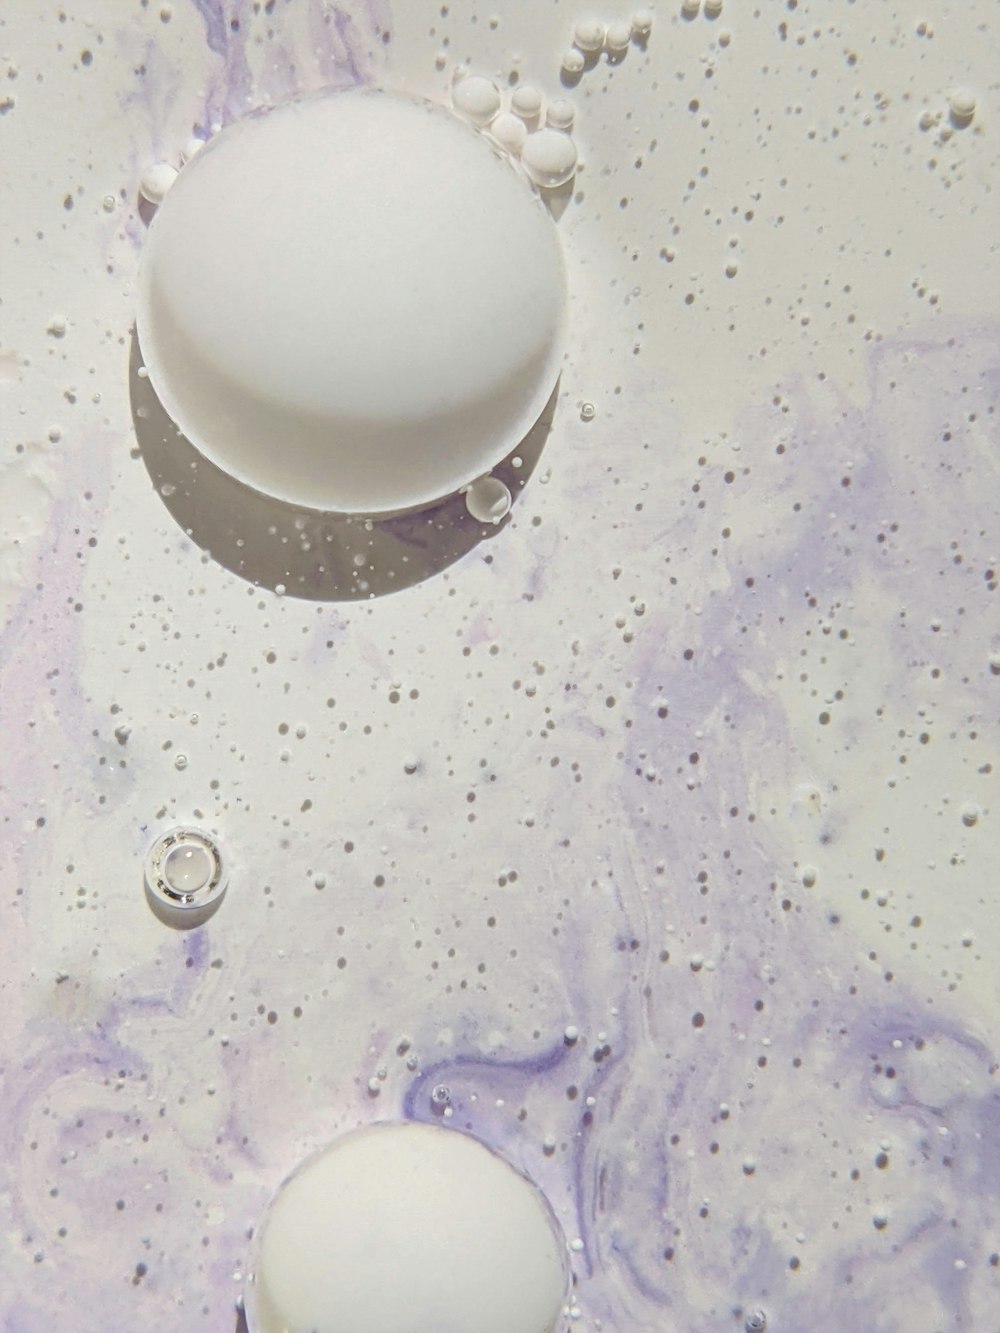 a close up of two eggs in a sink